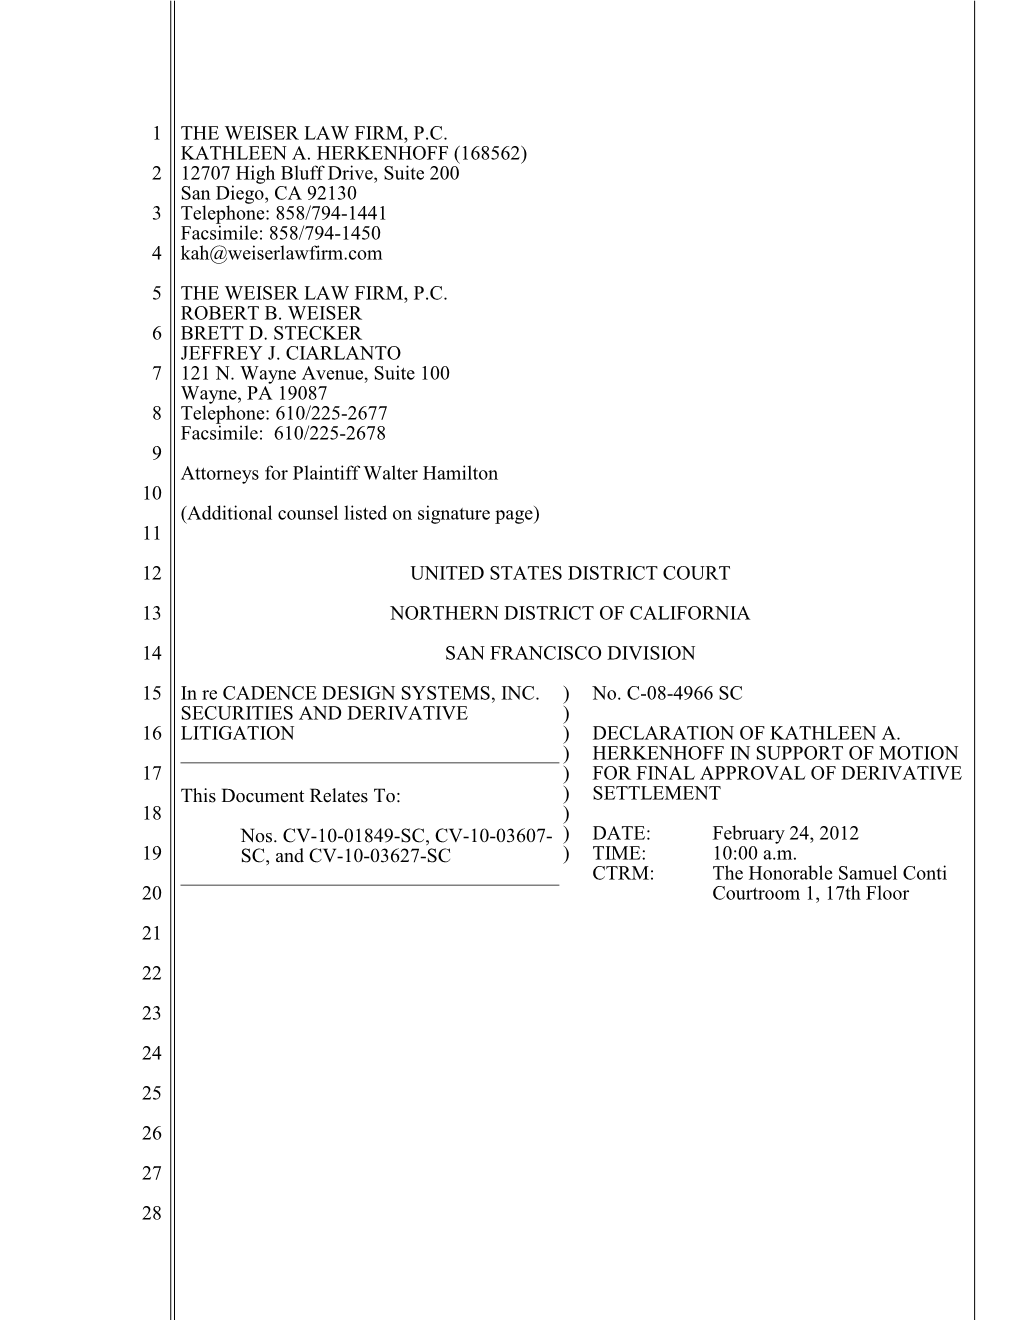 In Re: Cadence Design Systems, Inc. Securities Litigation 08-CV-04966